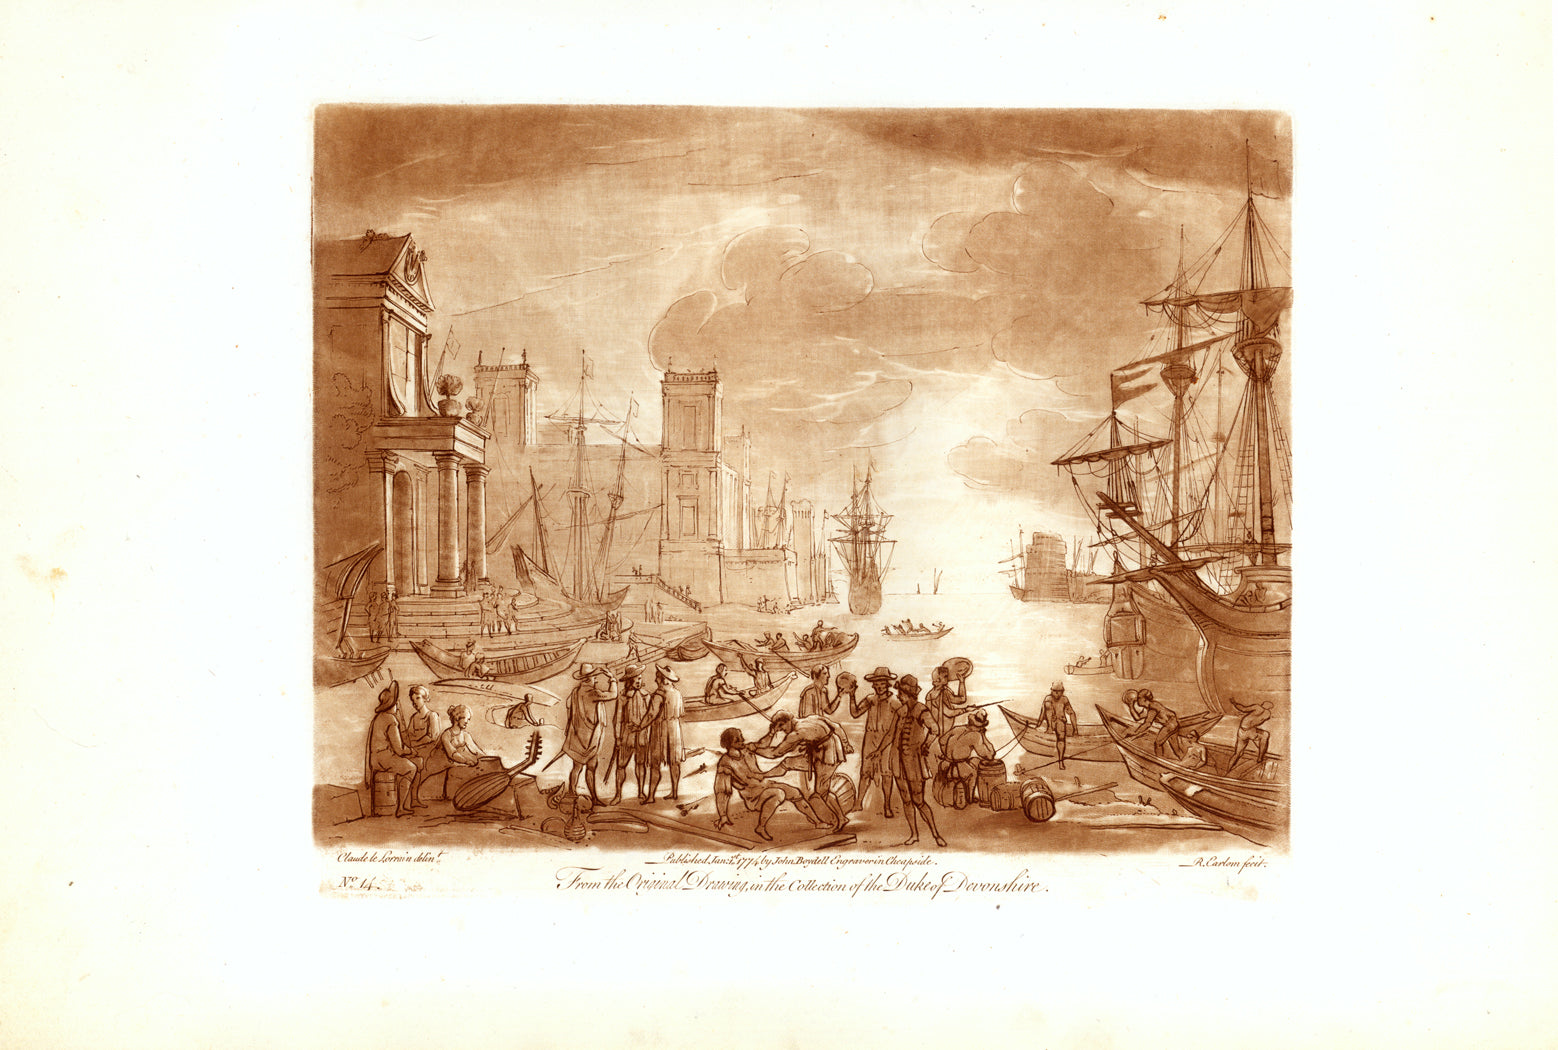  No title. Seaport. Several sail ships having arrived.  Shipping agents, longshoremen, passengers passing time at the pier in expectation of discharging and loading goods .  Mezzotint by Richard Earlom (1743-1822) Printed in superb sepia color After the drawing by Claude le Lorrain (1600-1682) Published in Liber Veritatis London, dated 1774  Original antique print  